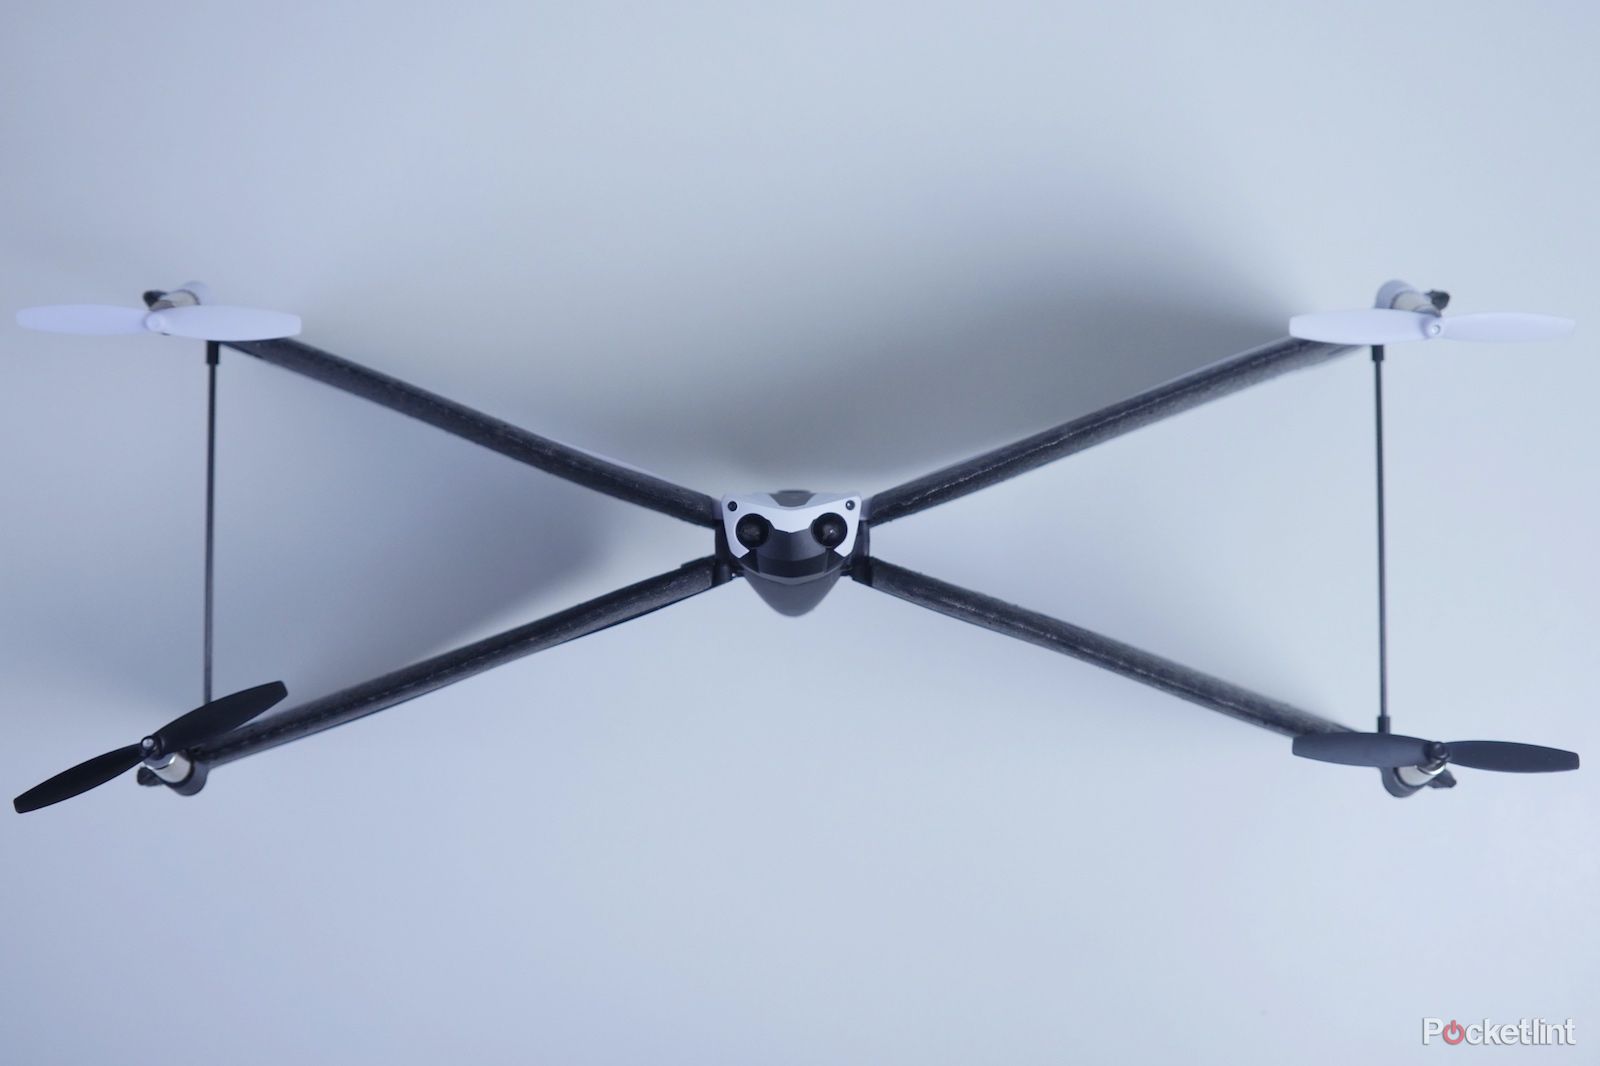 parrot swing drone review image 3